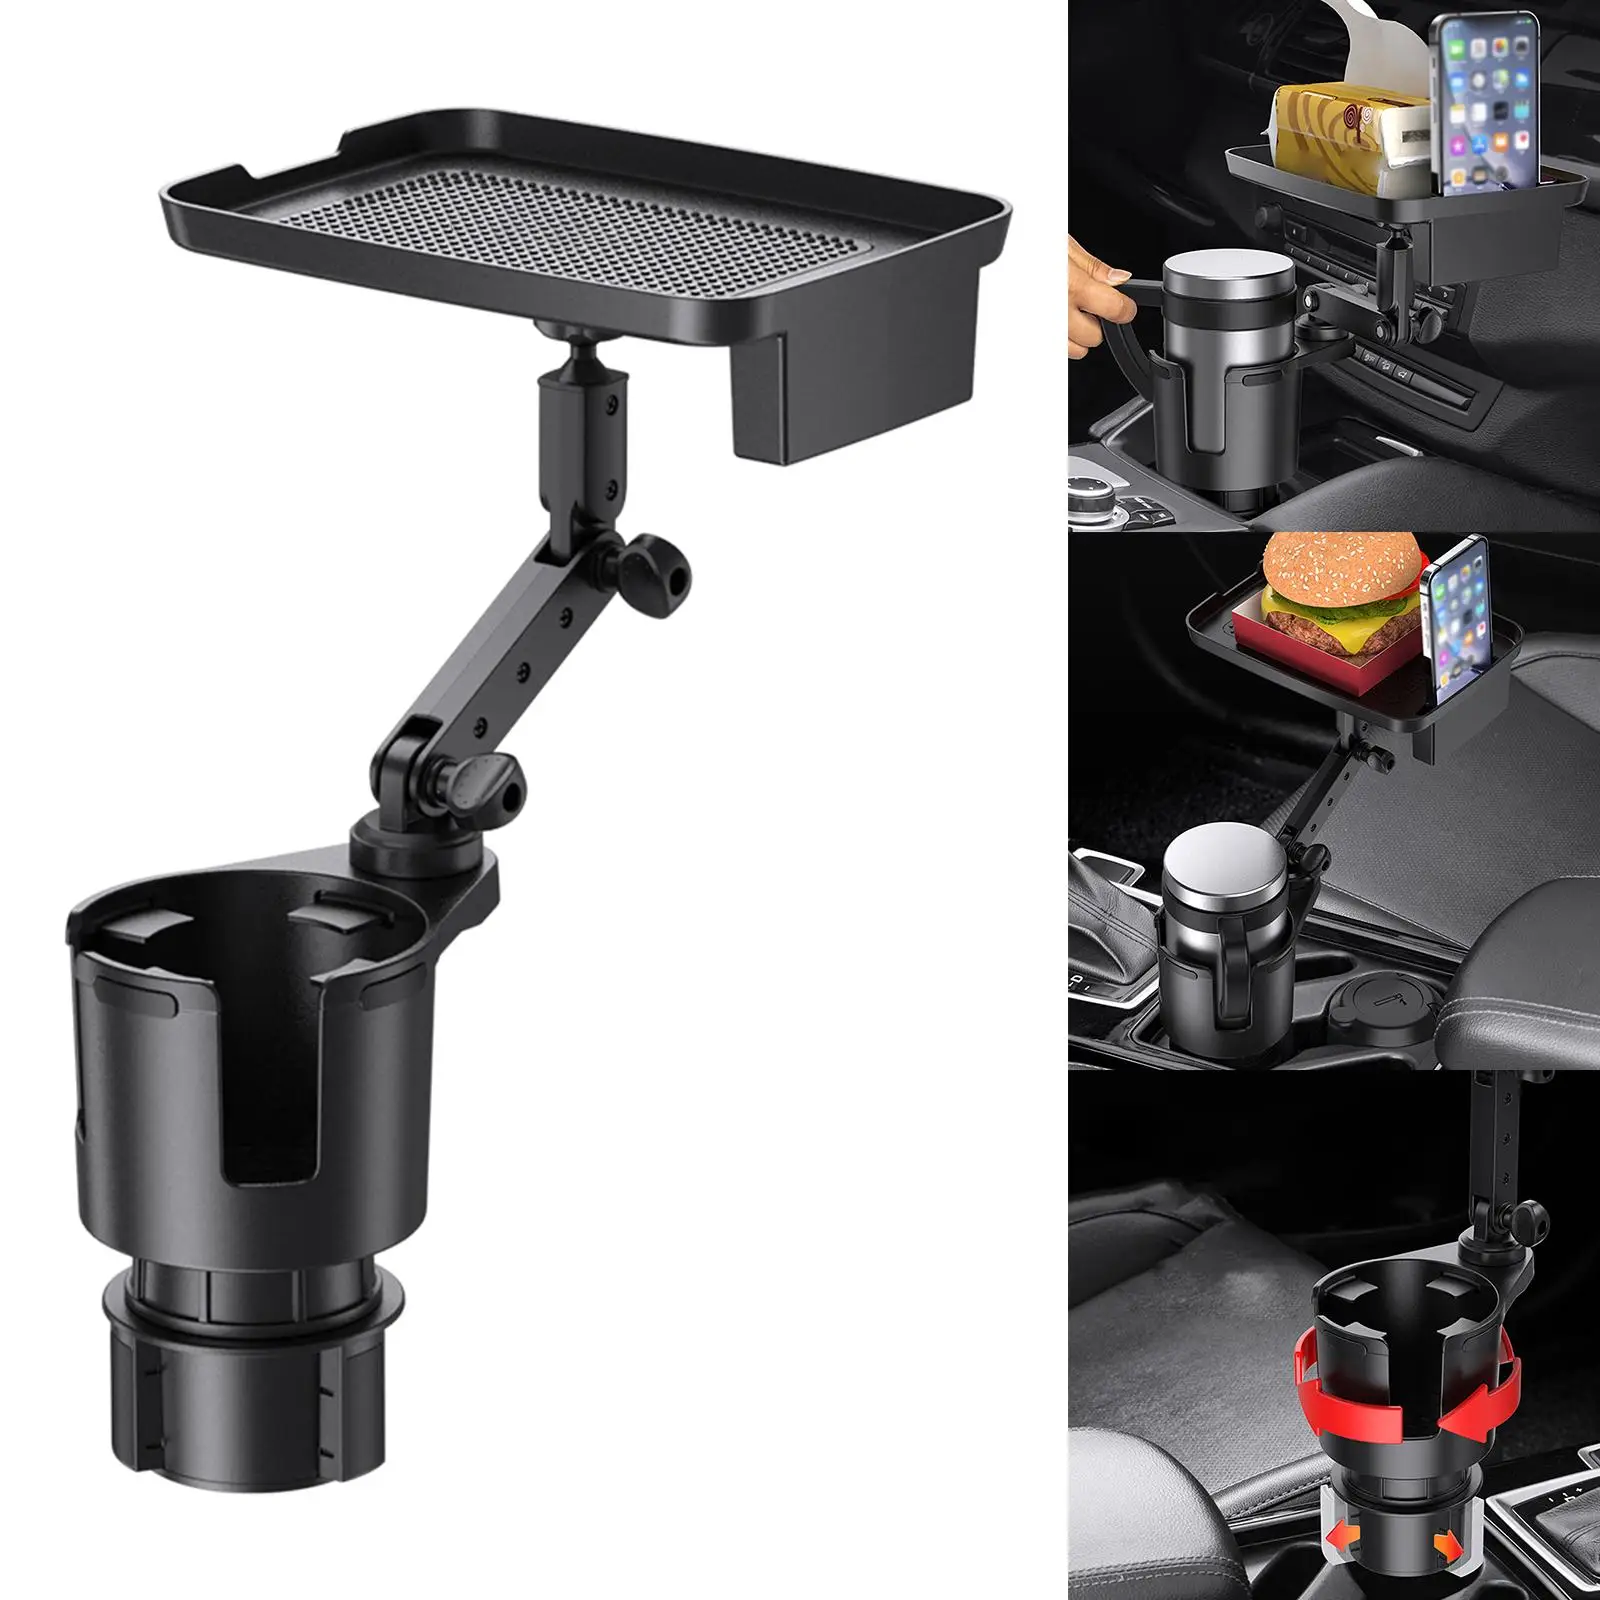 Car Cup Holder Expander with Tray, Adjustable Base auto Placement 360 Rotatable bottle Holder for Water Cups Drinks